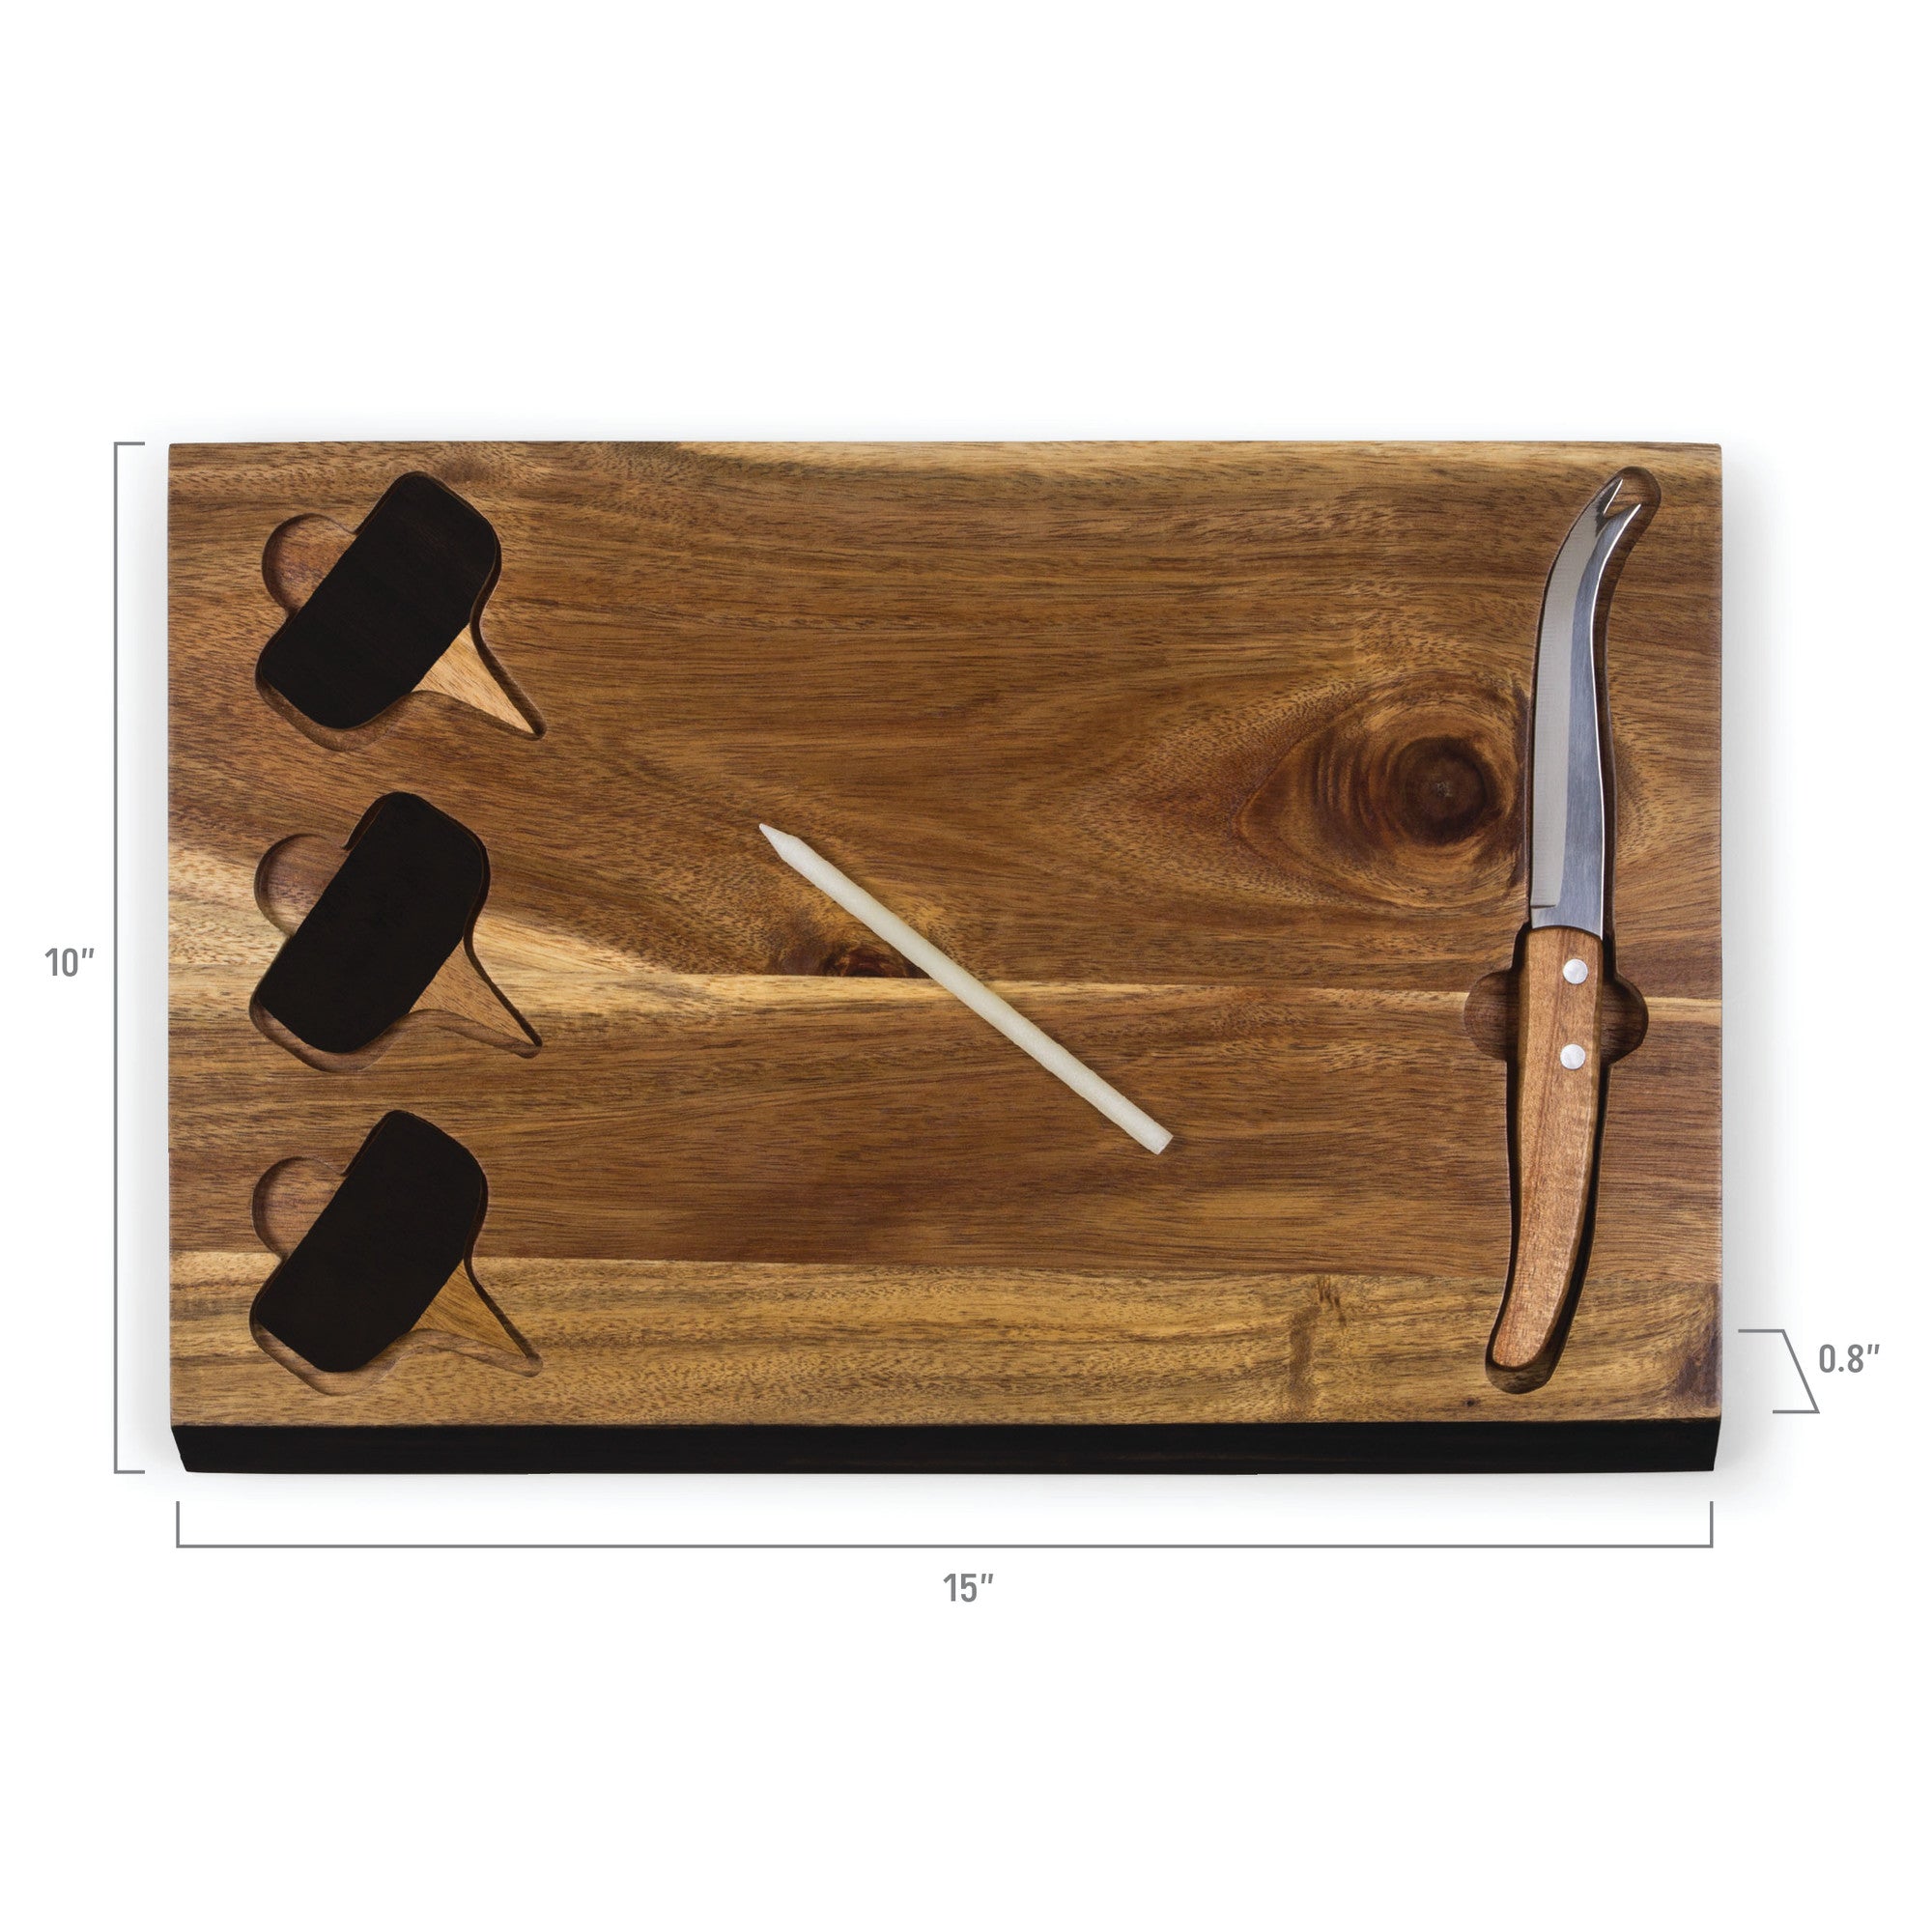 Clemson Tigers - Delio Acacia Cheese Cutting Board & Tools Set